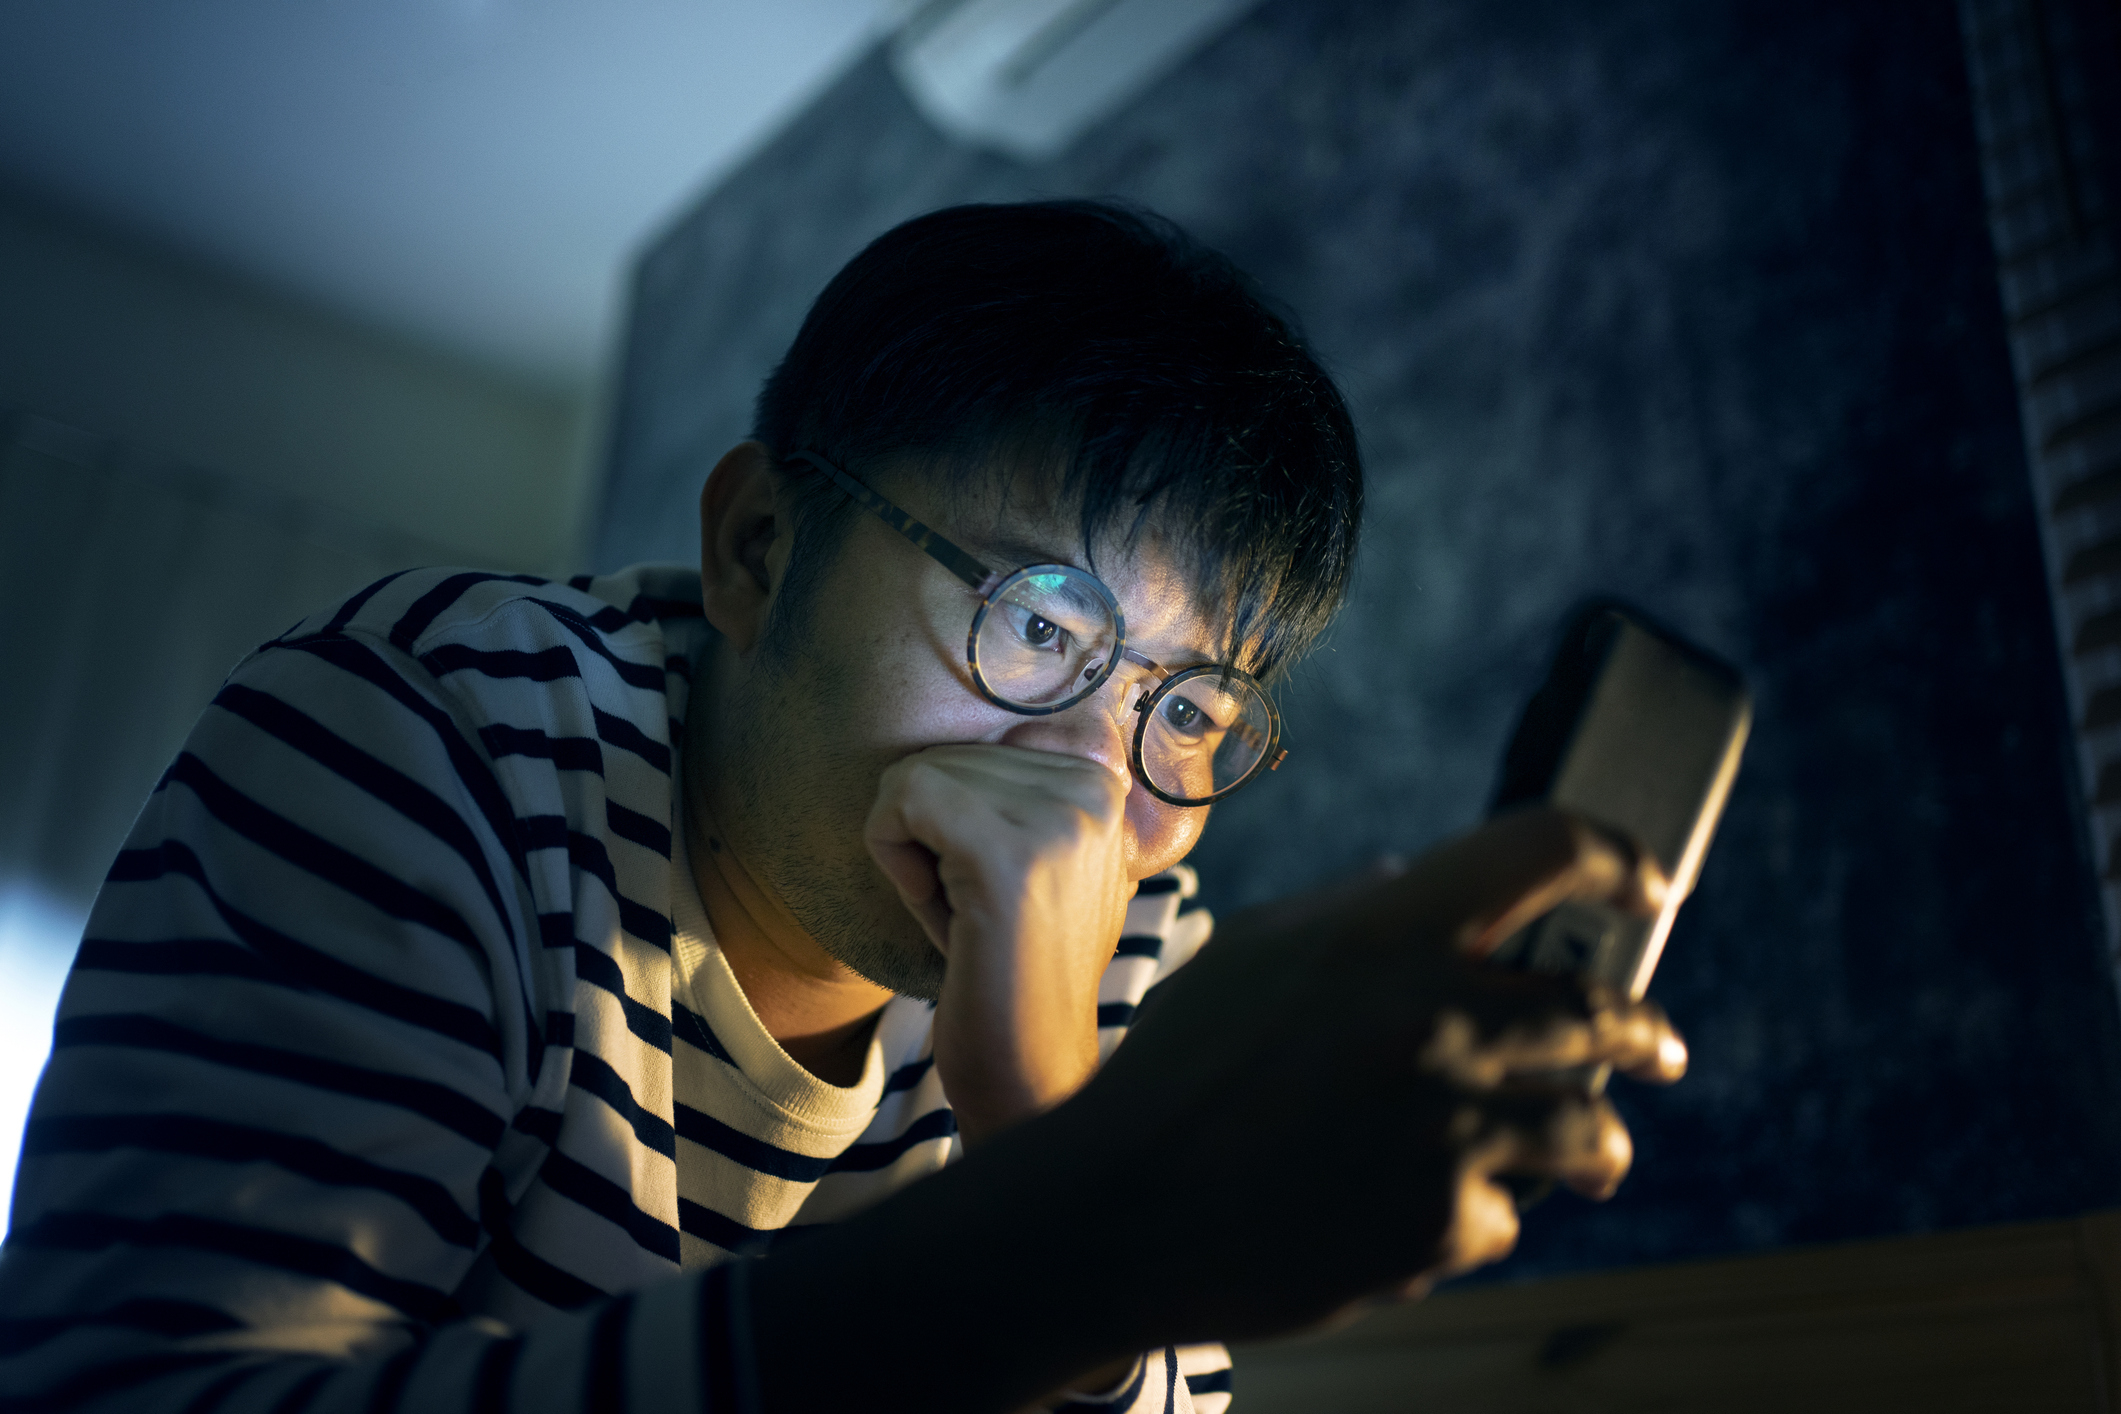 A person wearing glasses and a striped shirt looks intently at a smartphone screen, resting their chin on their hand